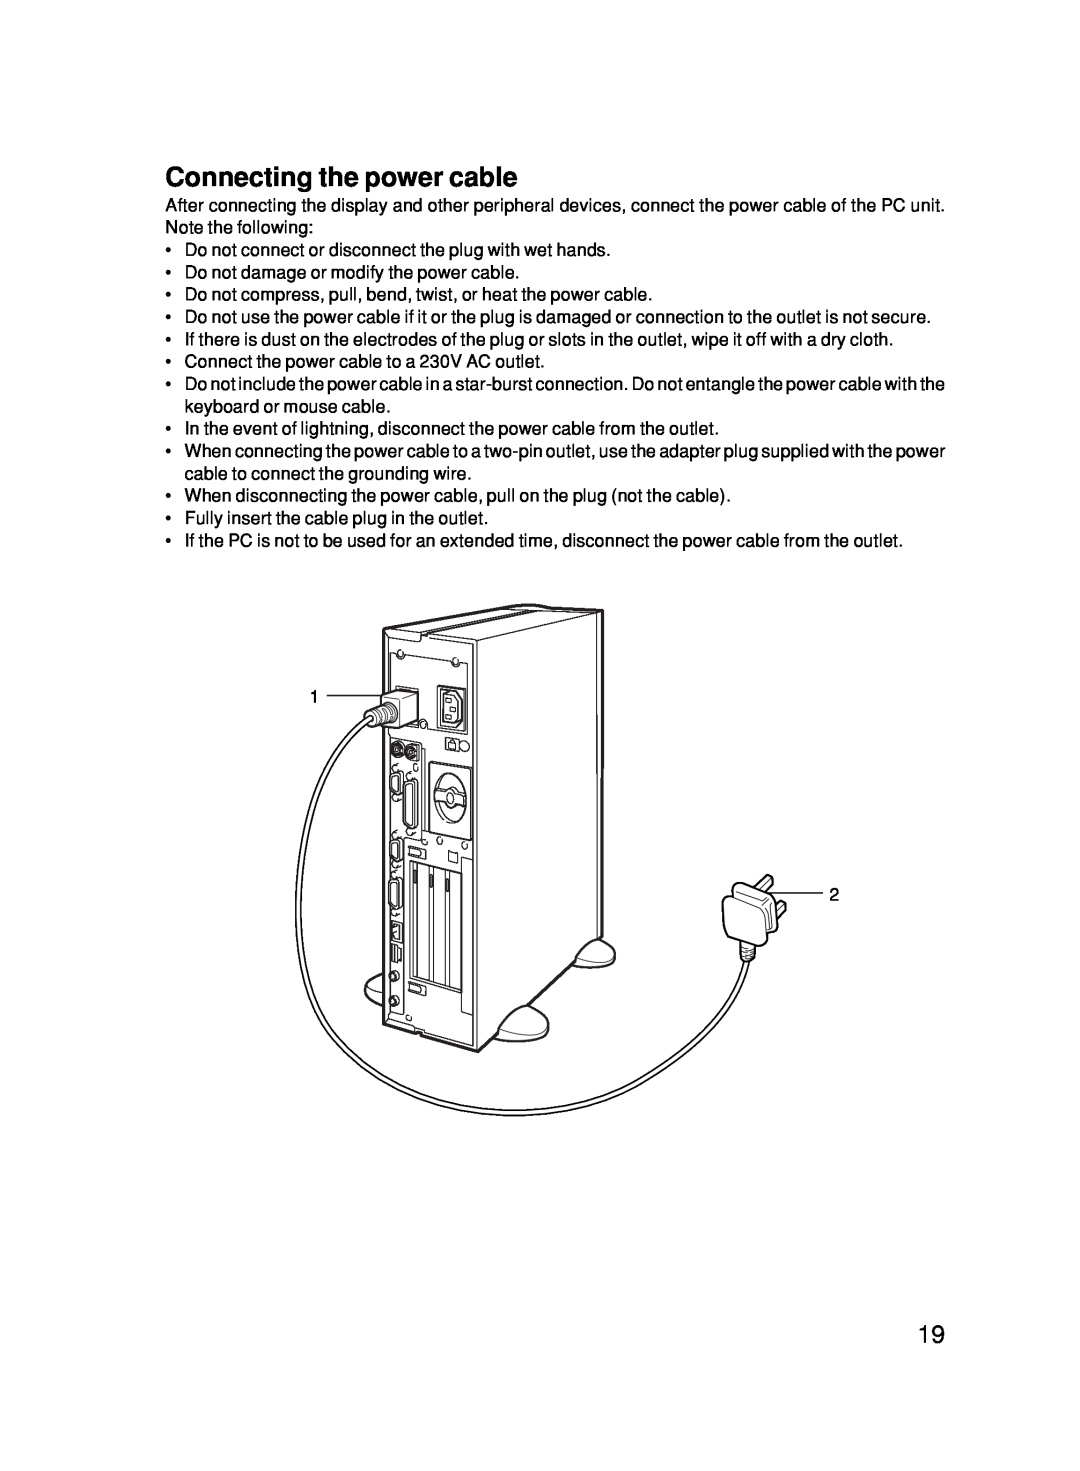 Fujitsu 500 user manual Connecting the power cable 